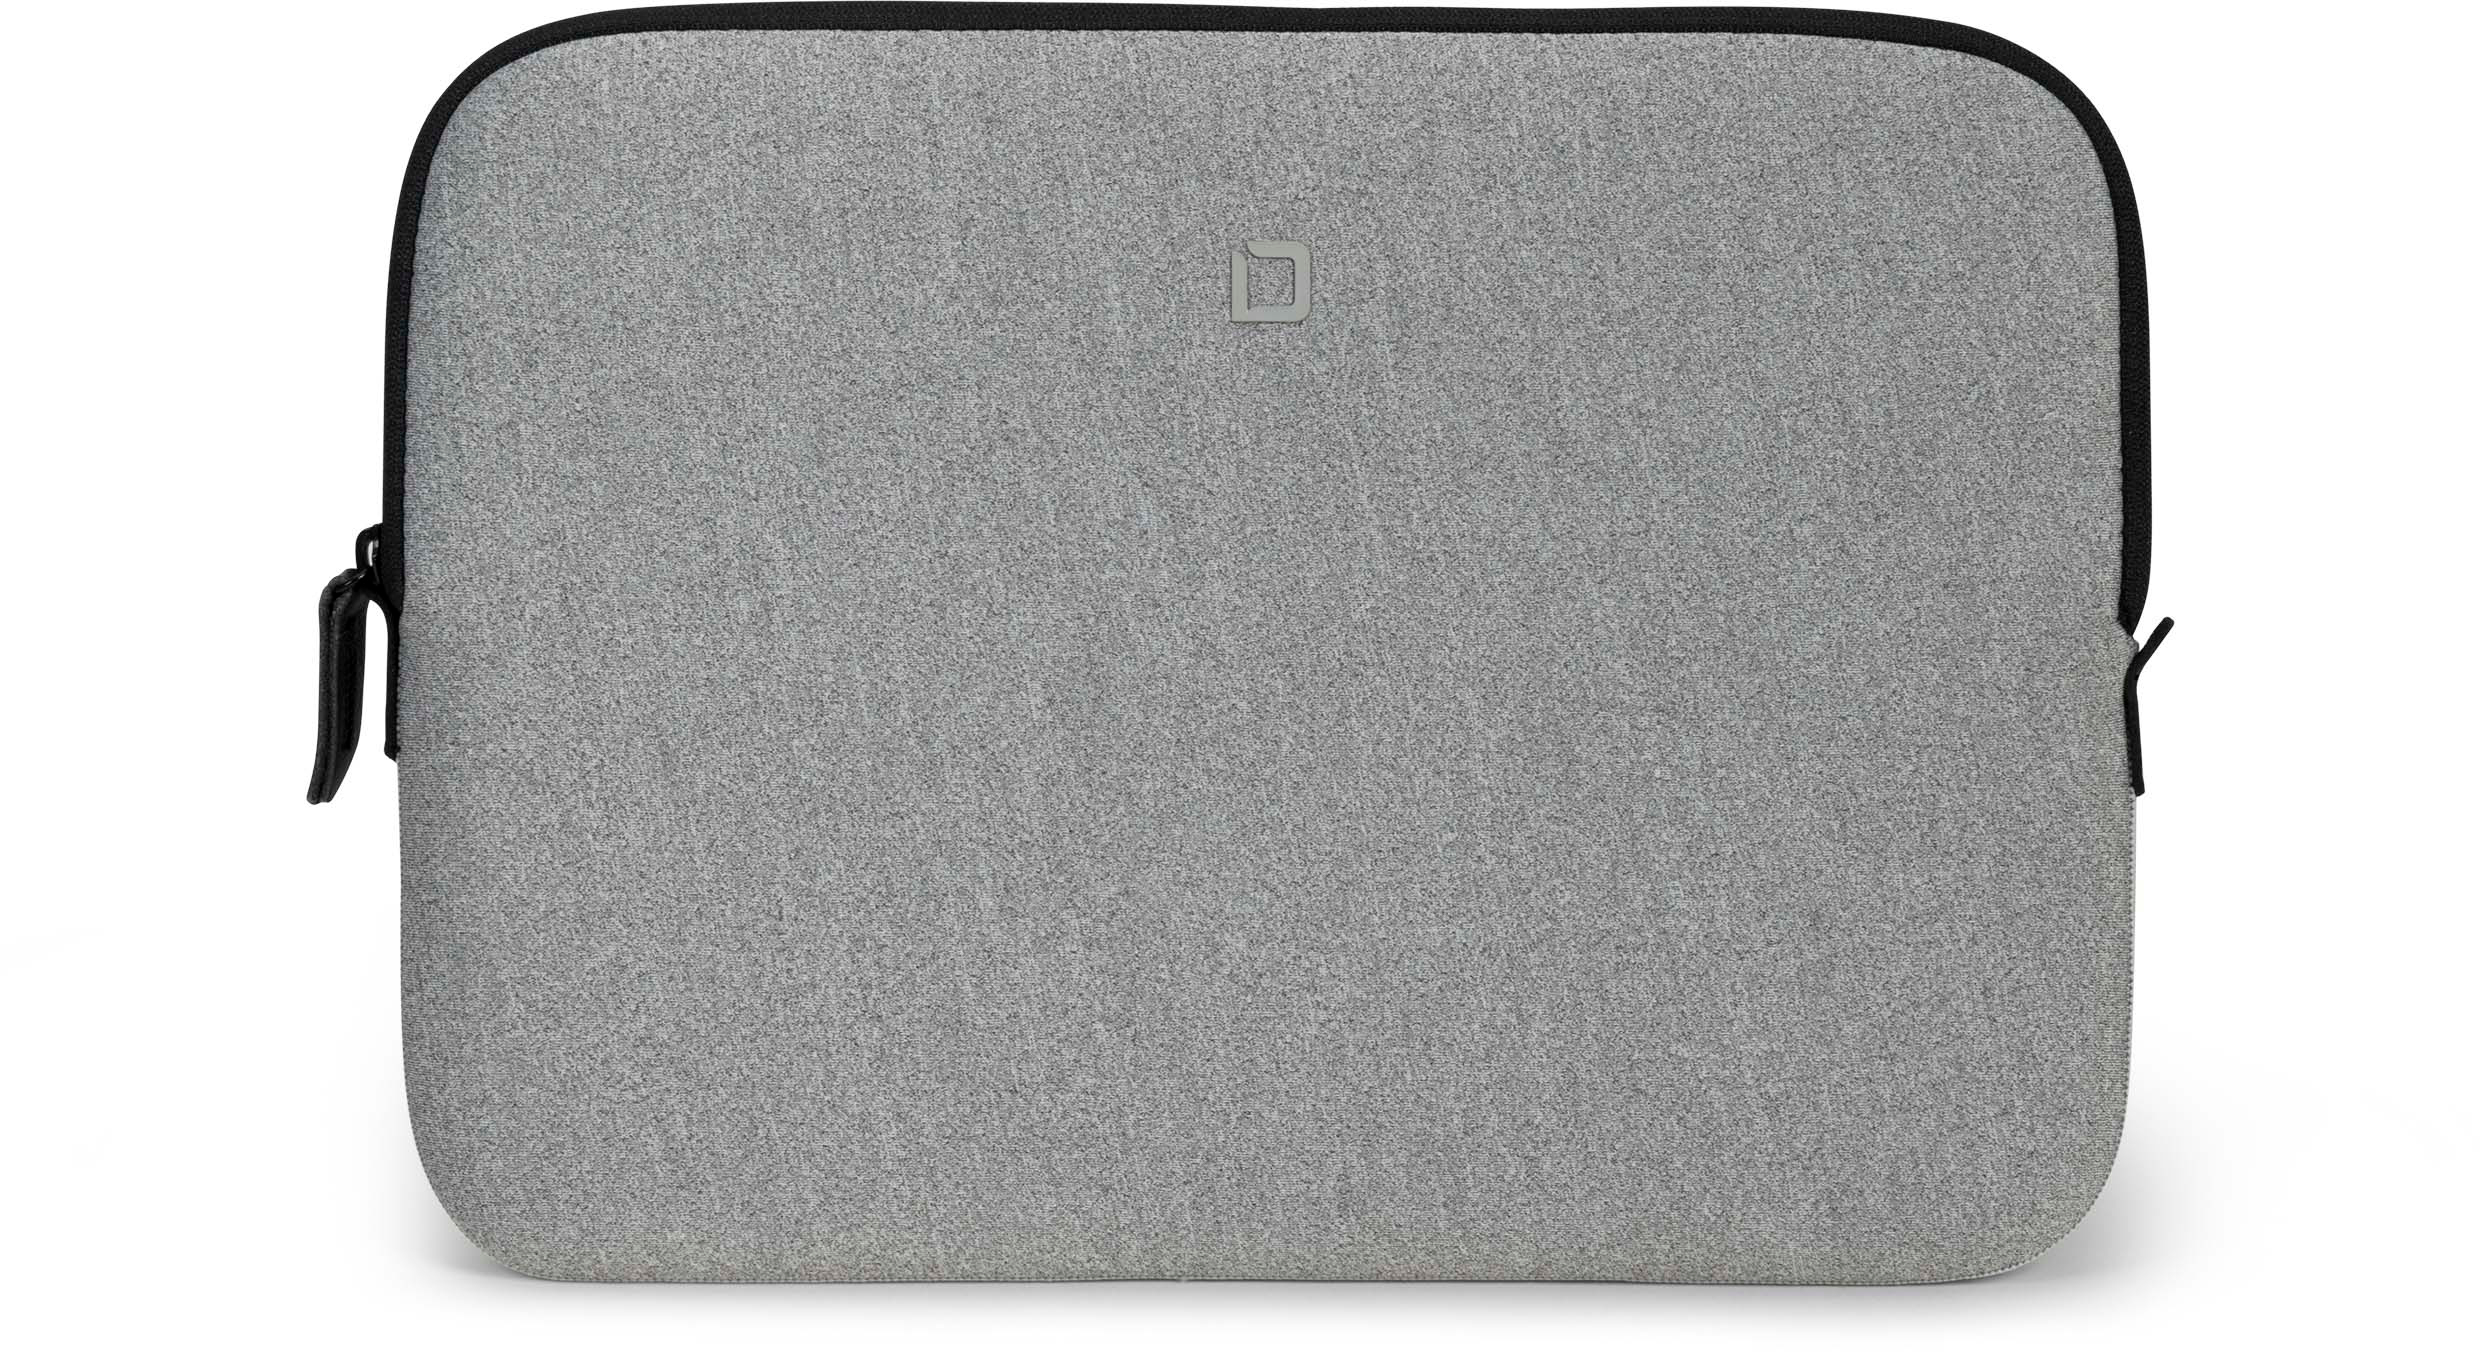 DICOTA Laptop Sleeve URBAN grey D31770 for MB or Ultrabook 16 inch for MB or Ultrabook 16 inch